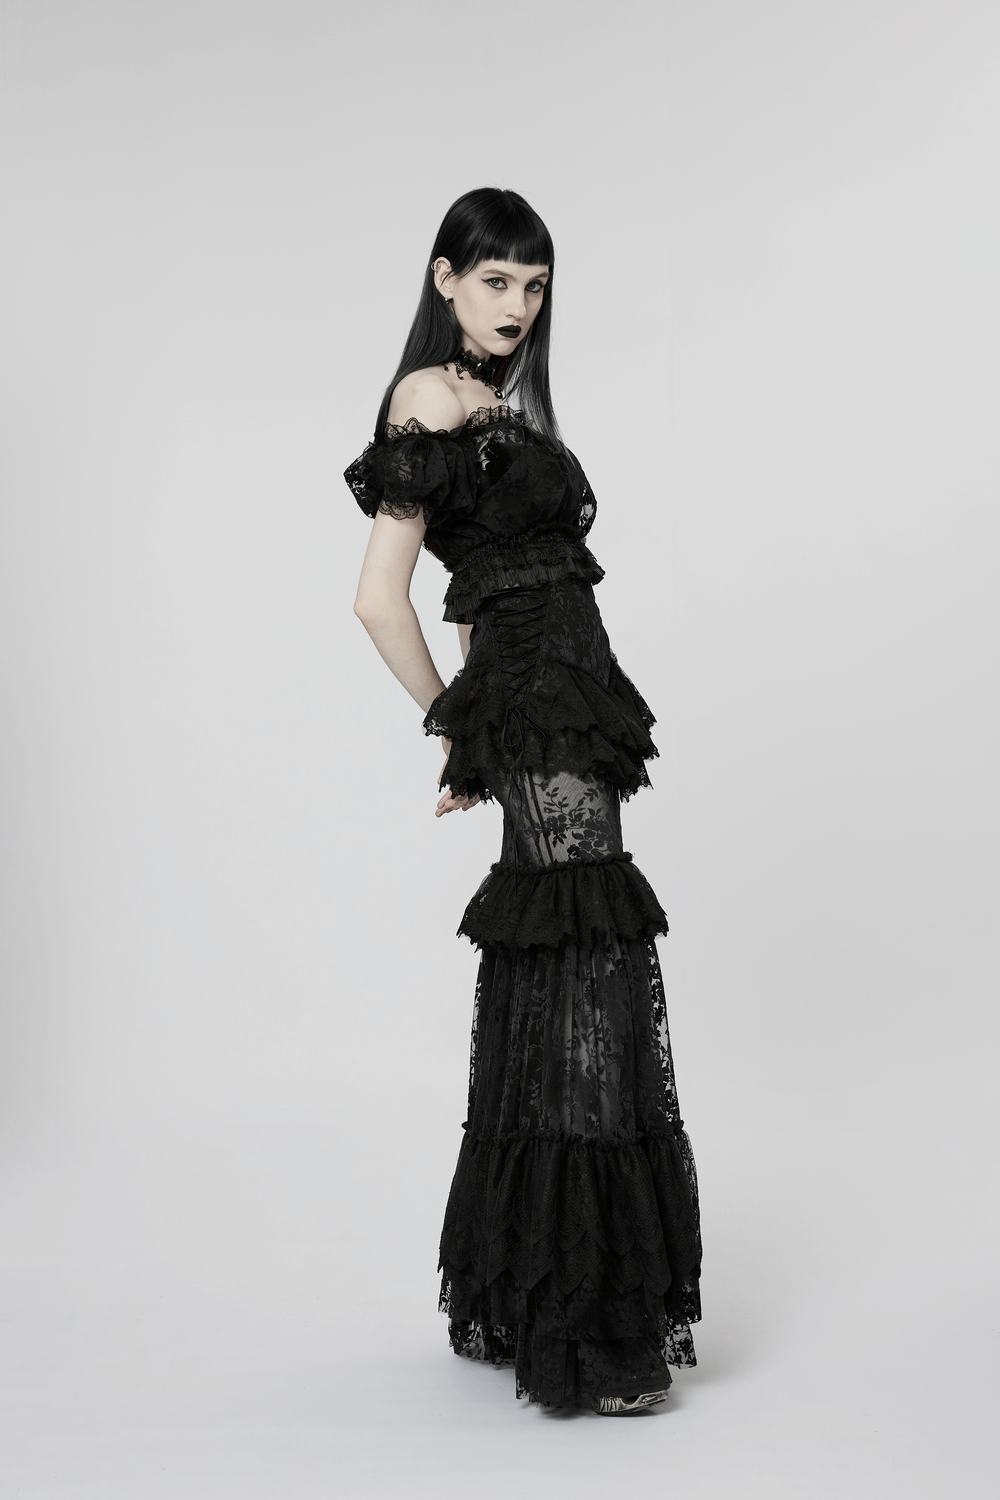 Flocked Mesh Gothic Crop Top with Lace and Bubble Sleeves - HARD'N'HEAVY